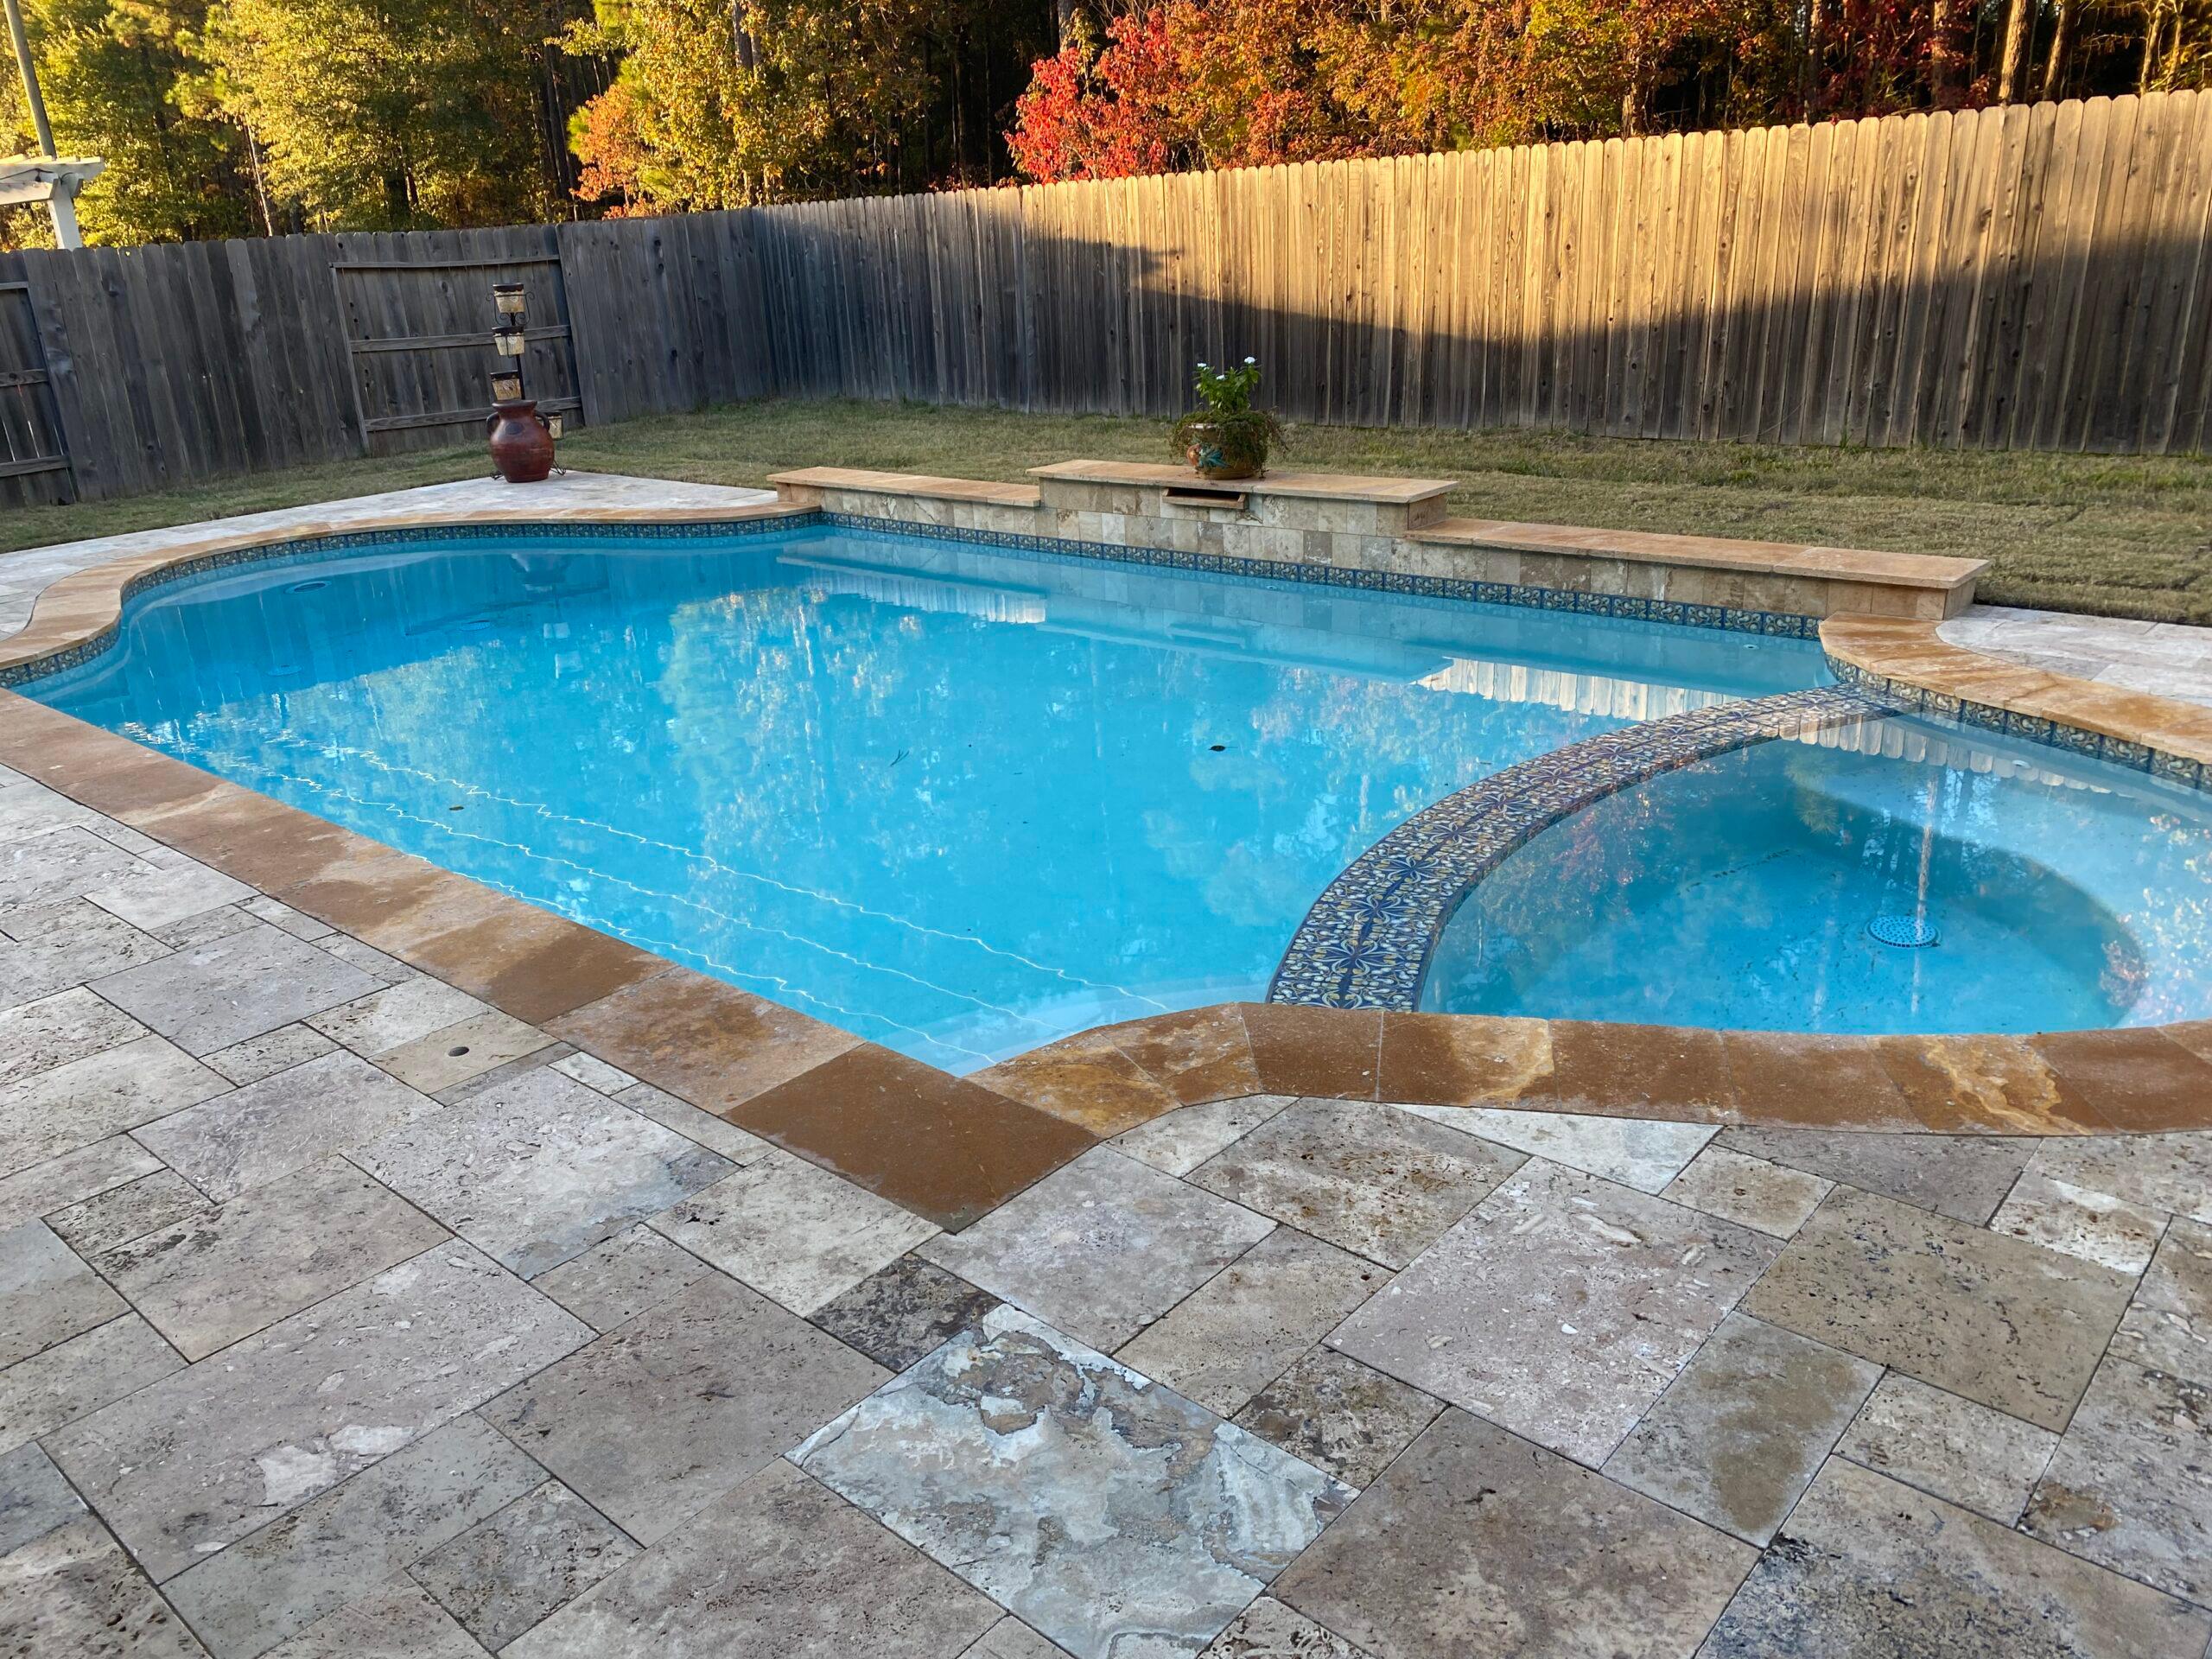 New inground pool with integrated spa